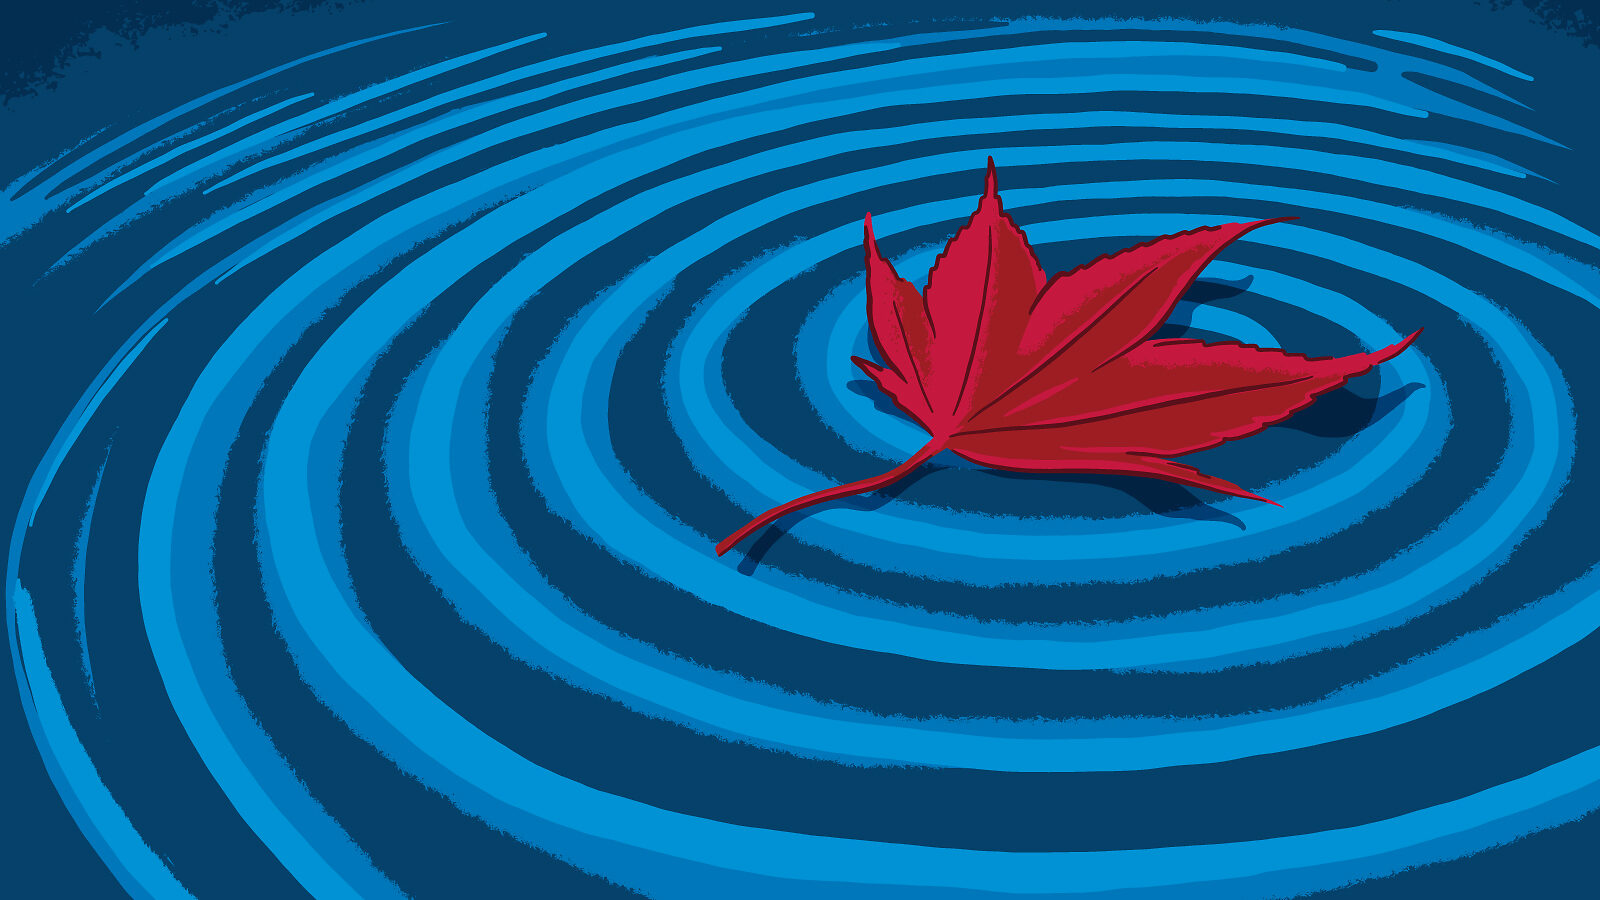 Illustration of a floating Japanese Maple leaf making waves in water